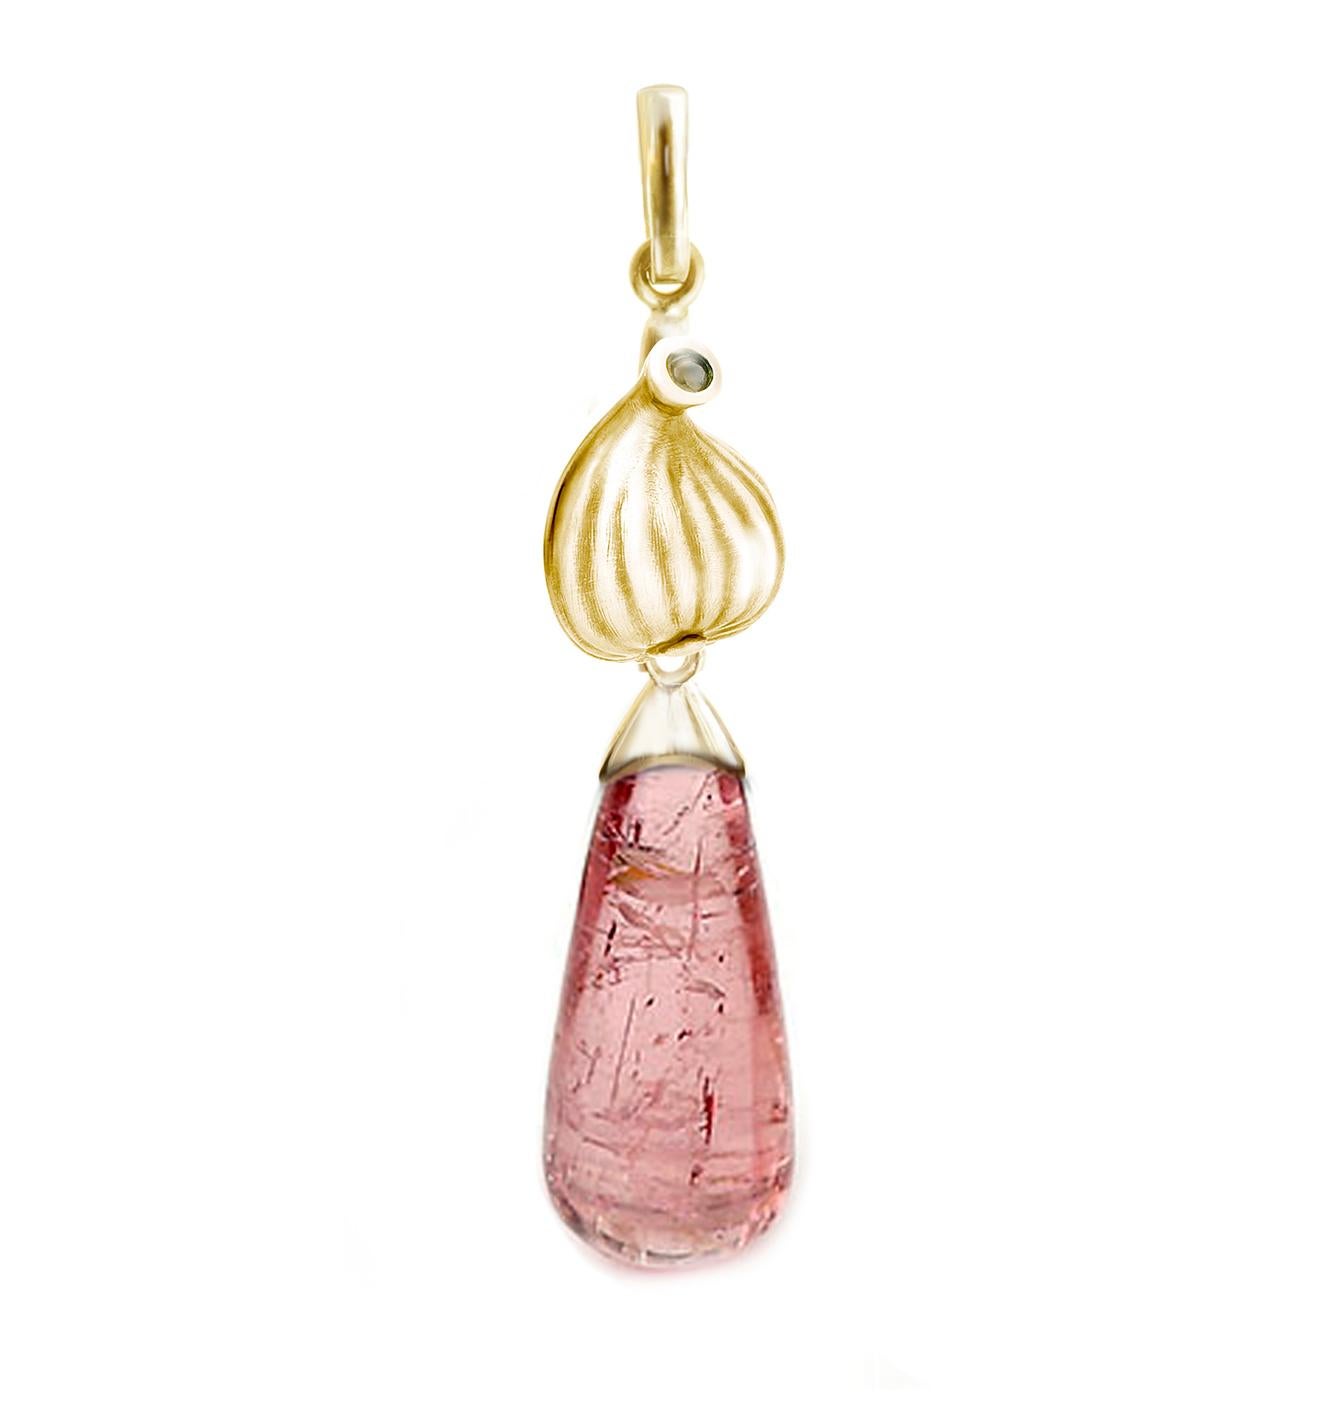 These contemporary drop earrings are made of 18 karat yellow gold with 20x8 mm (16 carats) natural rose tourmalines and round diamonds. The Fig collection was featured in Vogue UA review and they are designed by an artist and oil painter from